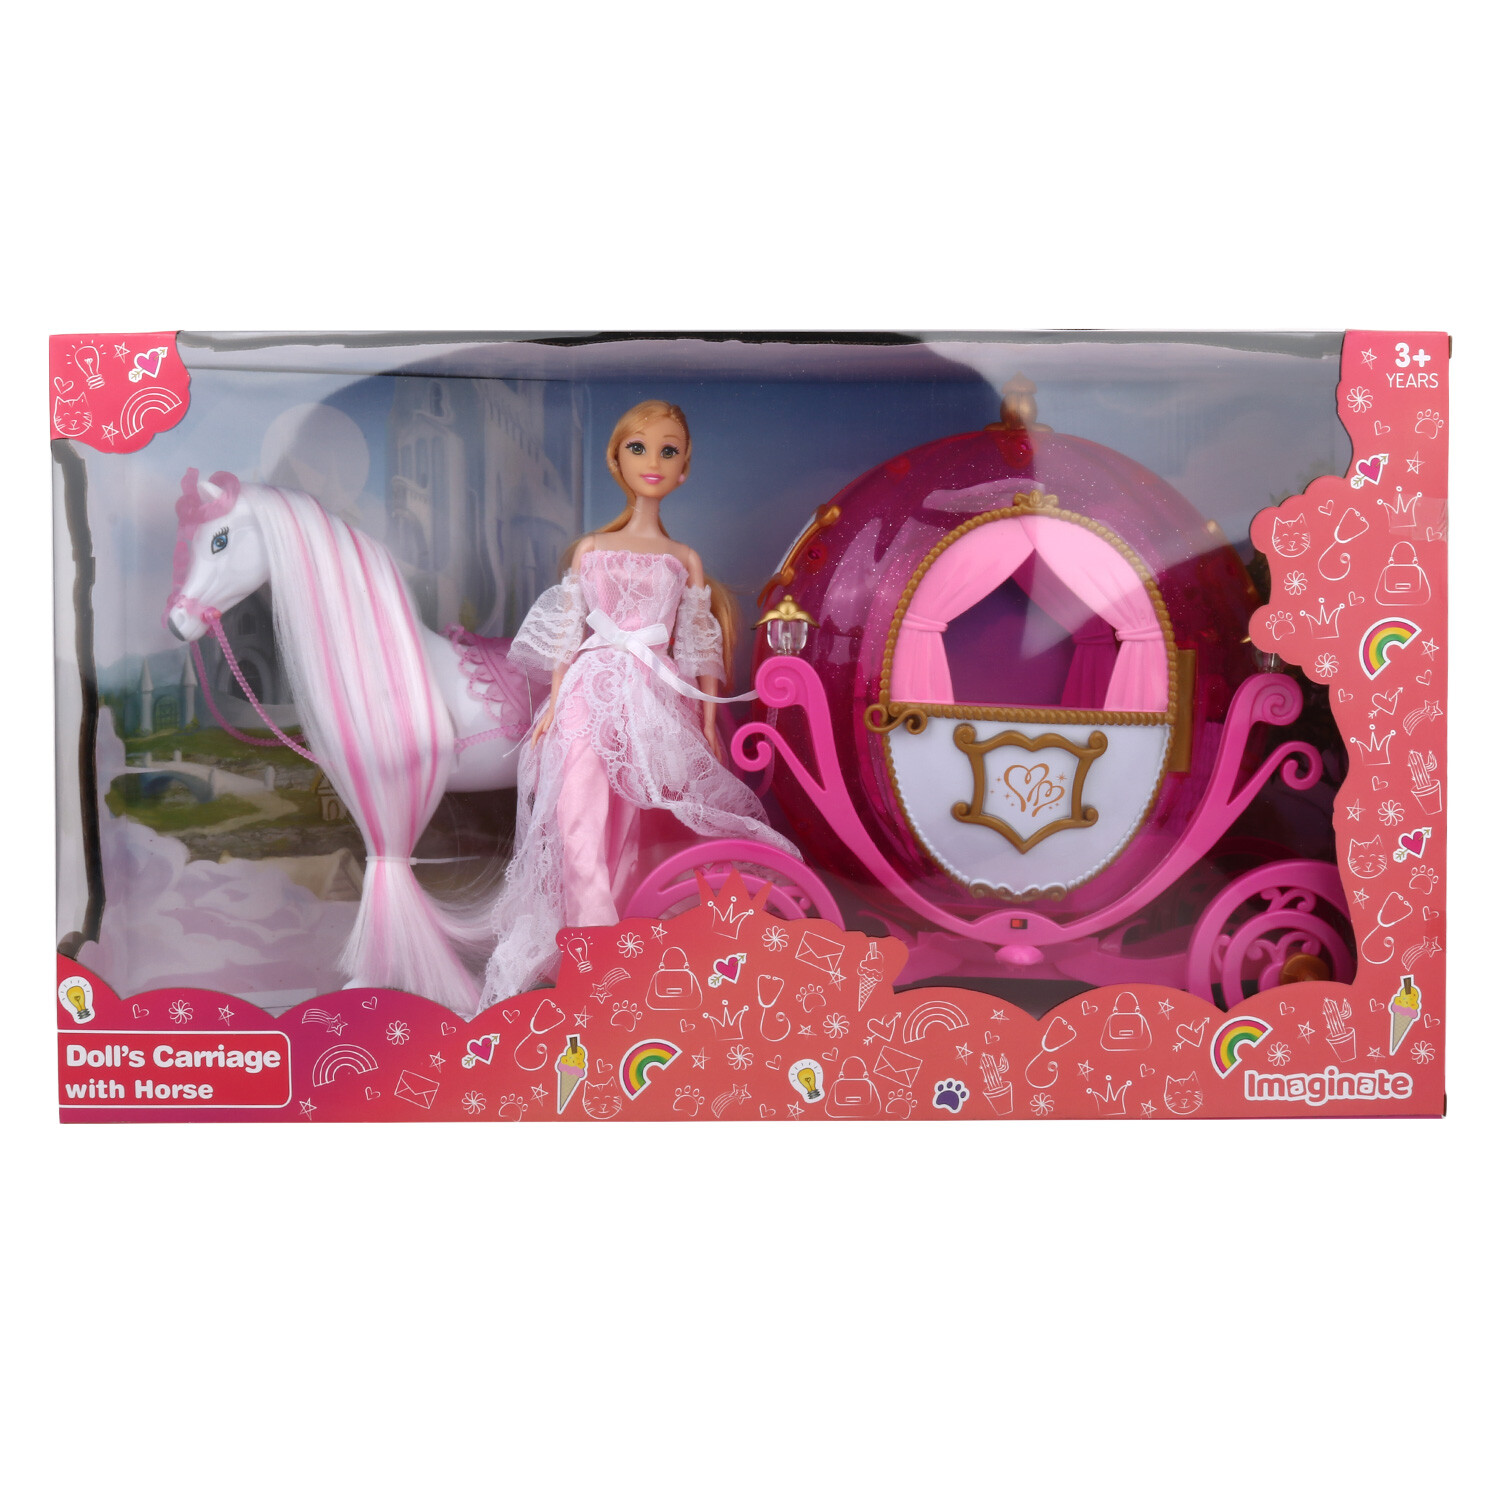 Doll's Carriage with Horse - Pink Image 2